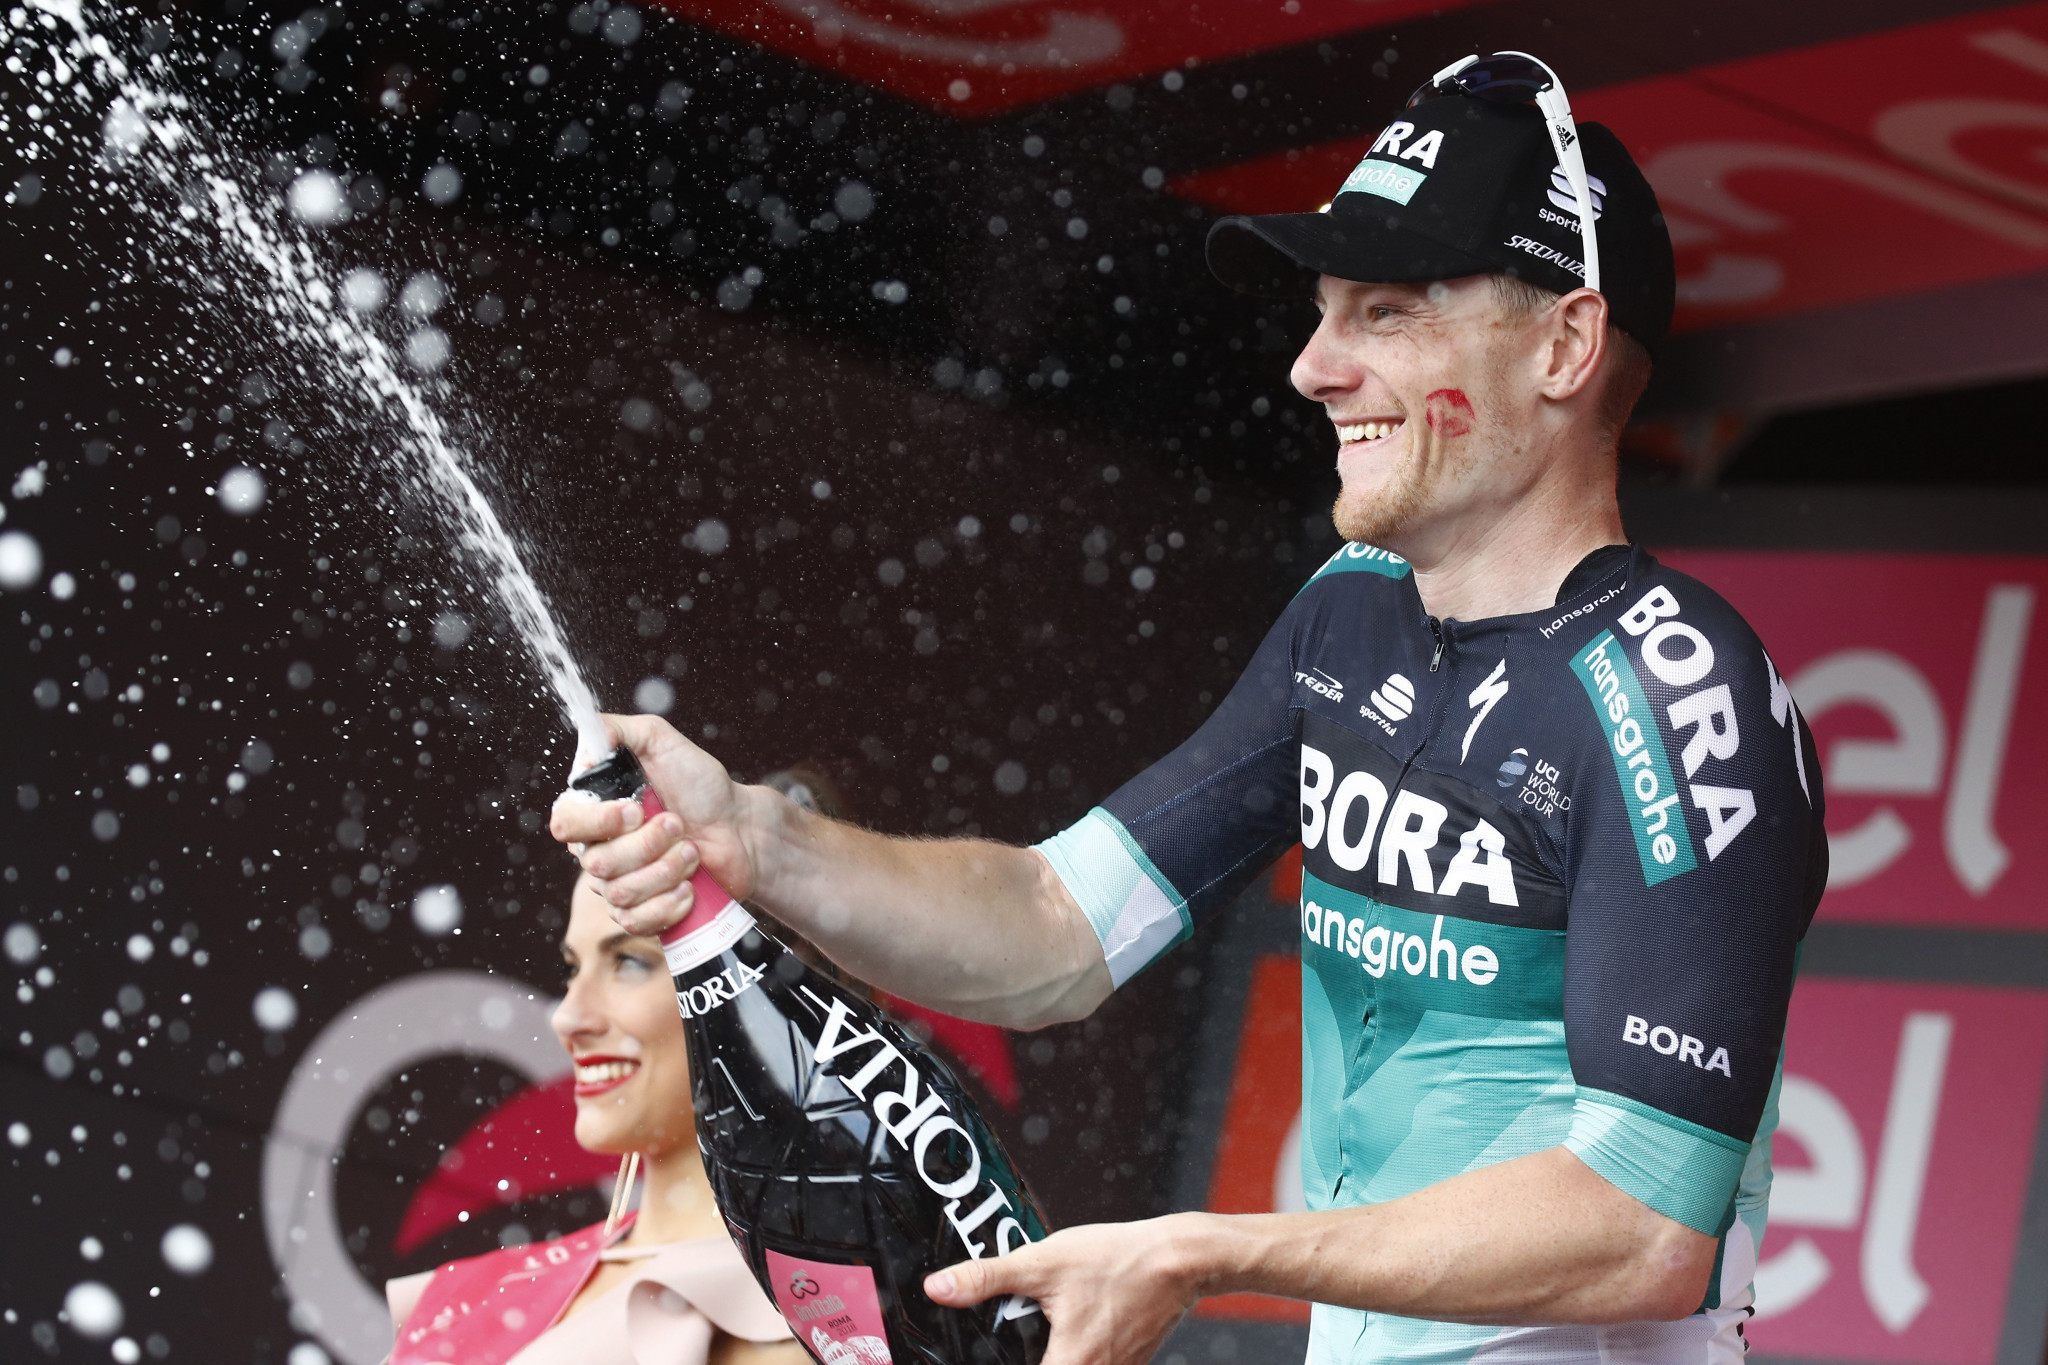 Sam Bennett won stage seven today at the Giro d'Italia ©Getty Images